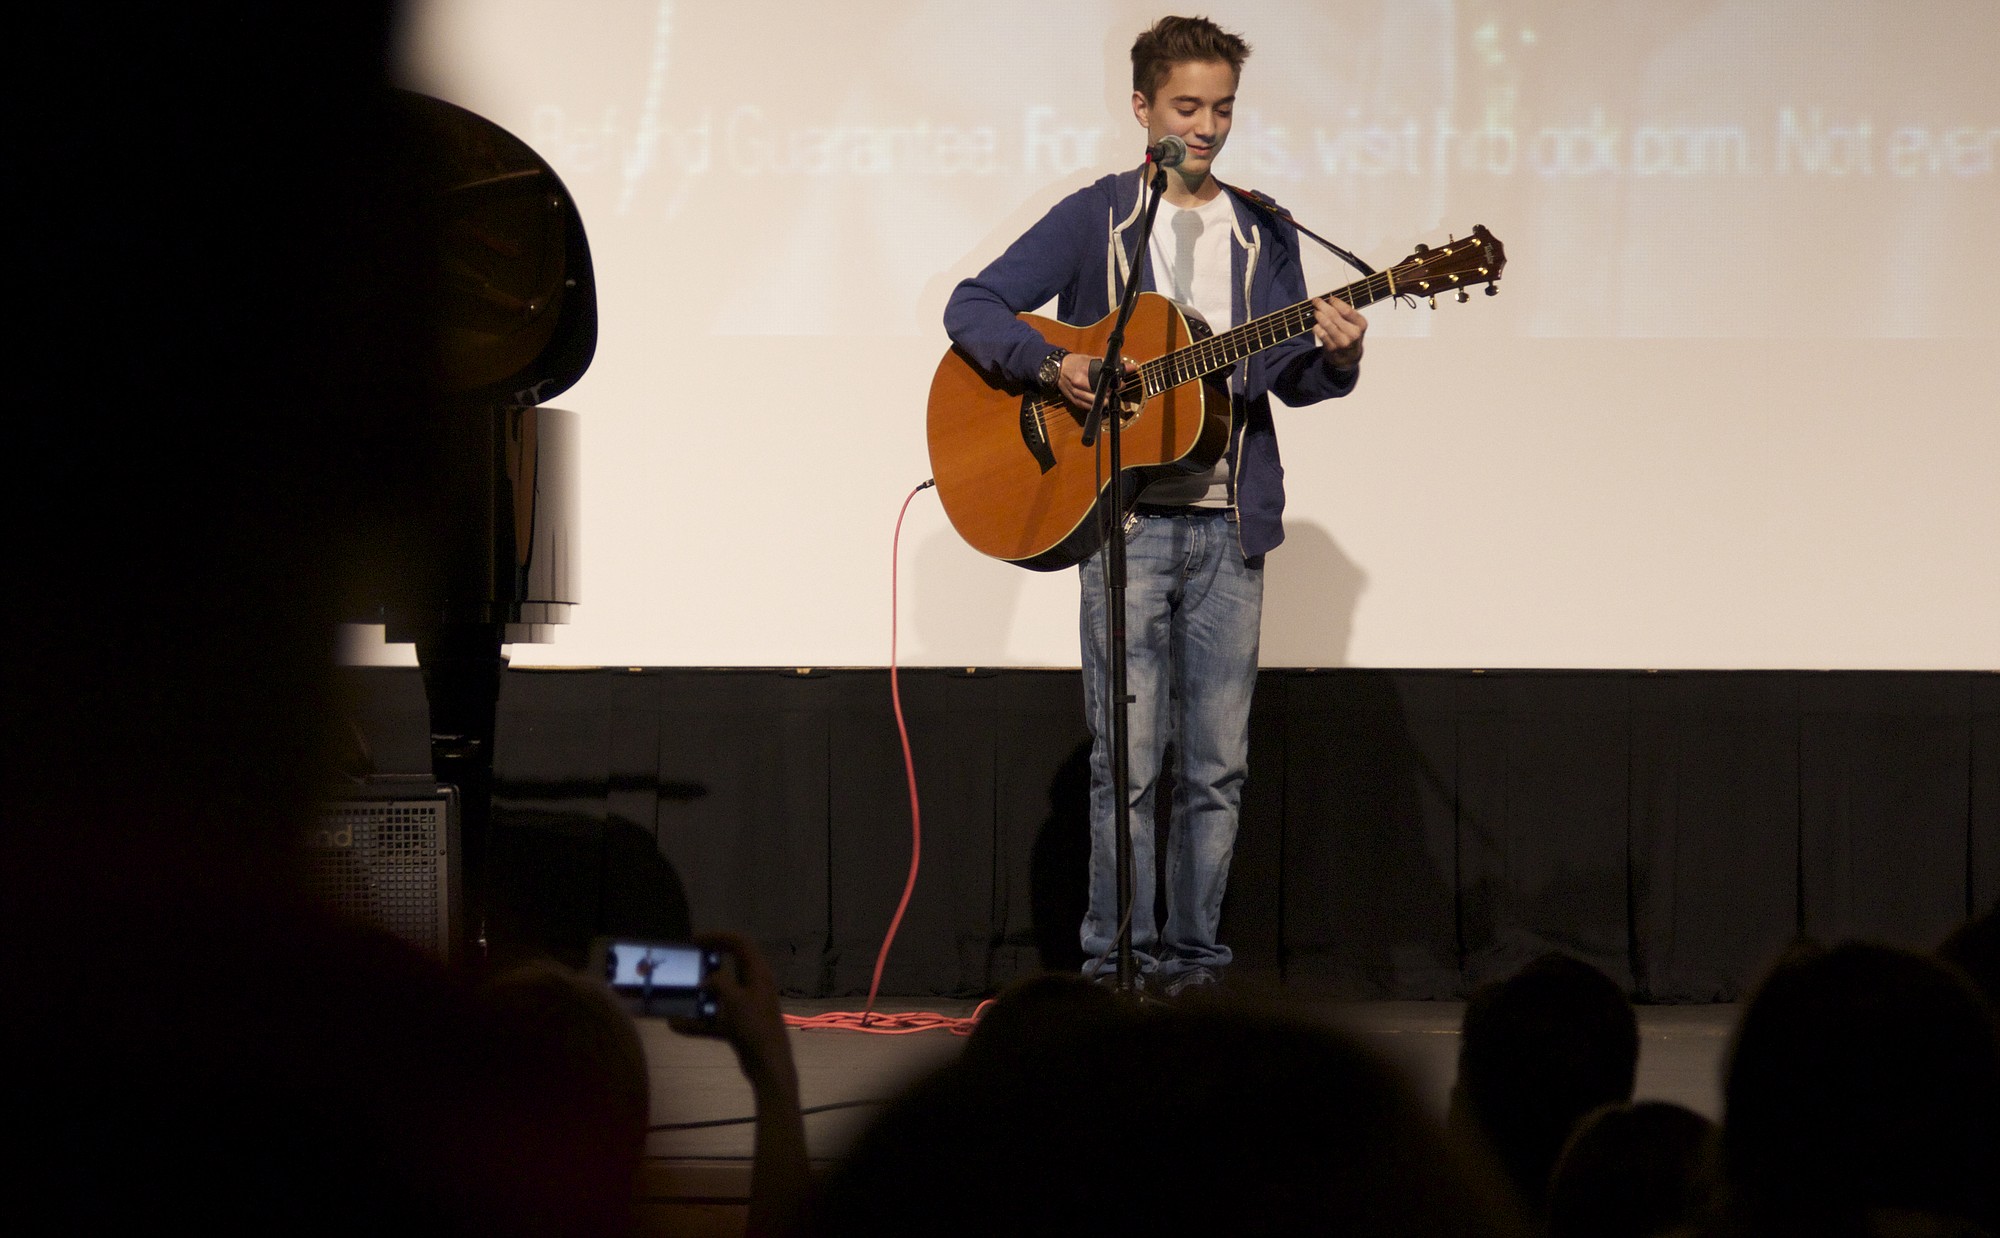 Daniel Seavey, 15, performs for a crowd at Union High School after they learned he would continue onto the next round of American Idol auditions in Hollywood, Calif.